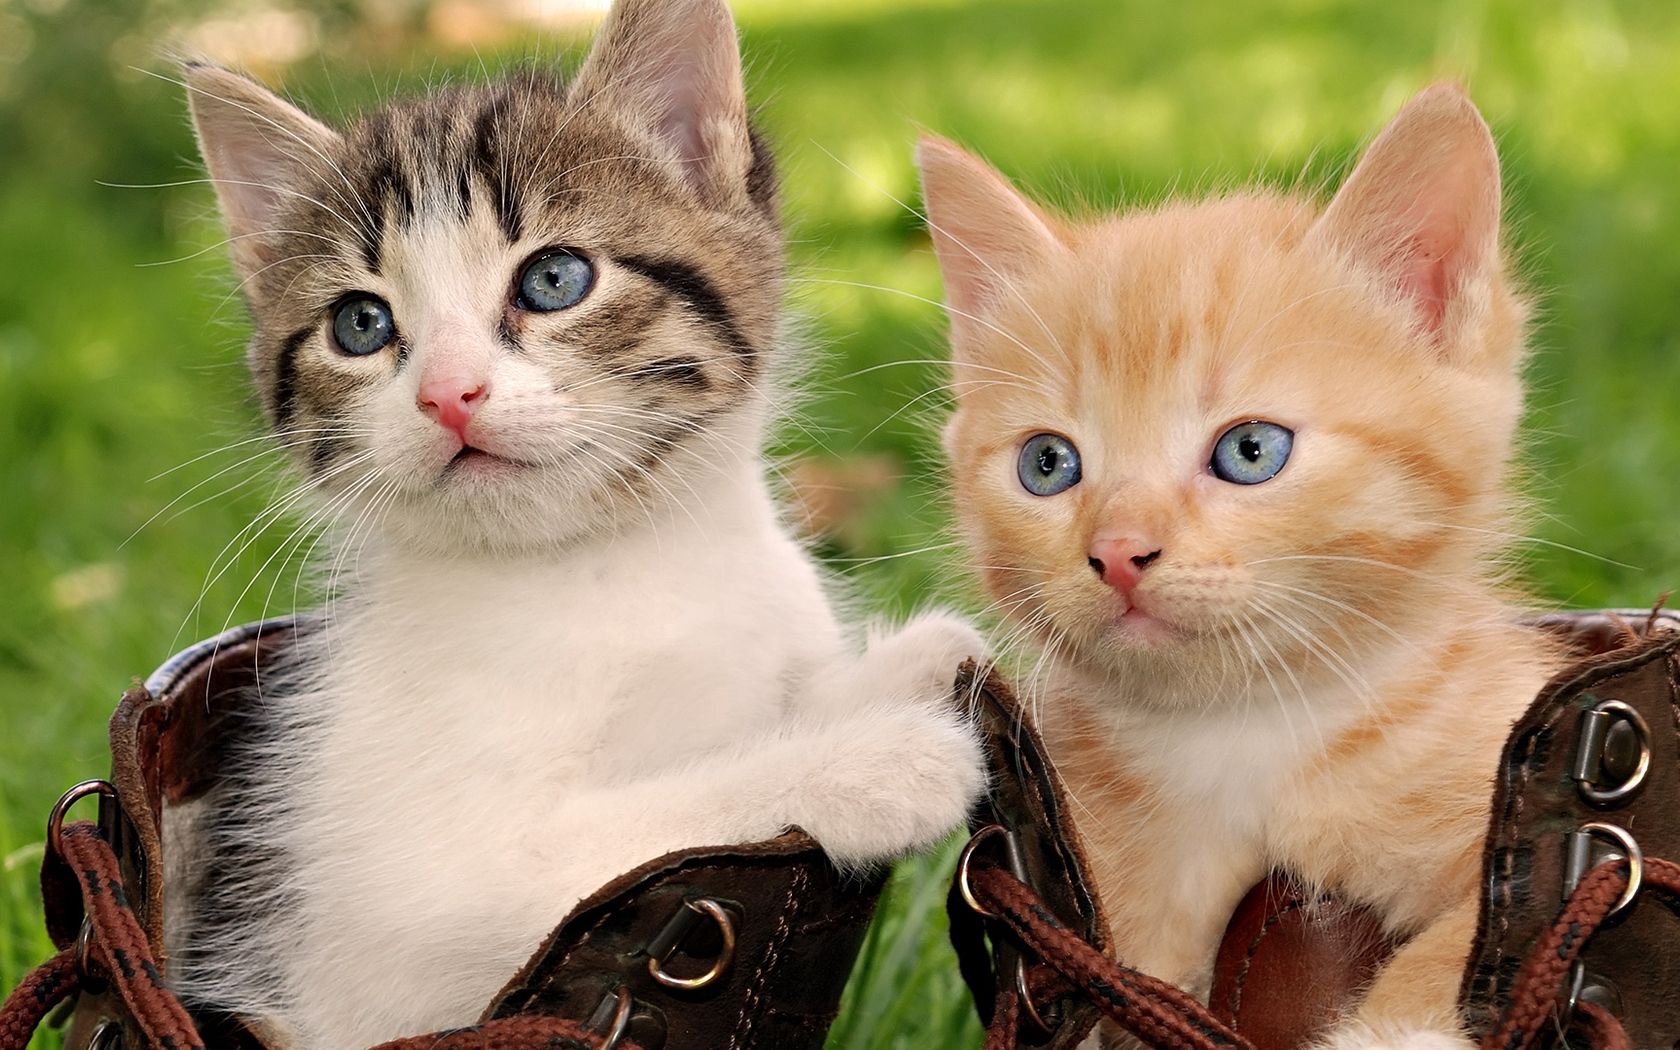 kittens, animals, sit, couple, pair, playful, boots, shoes cellphone